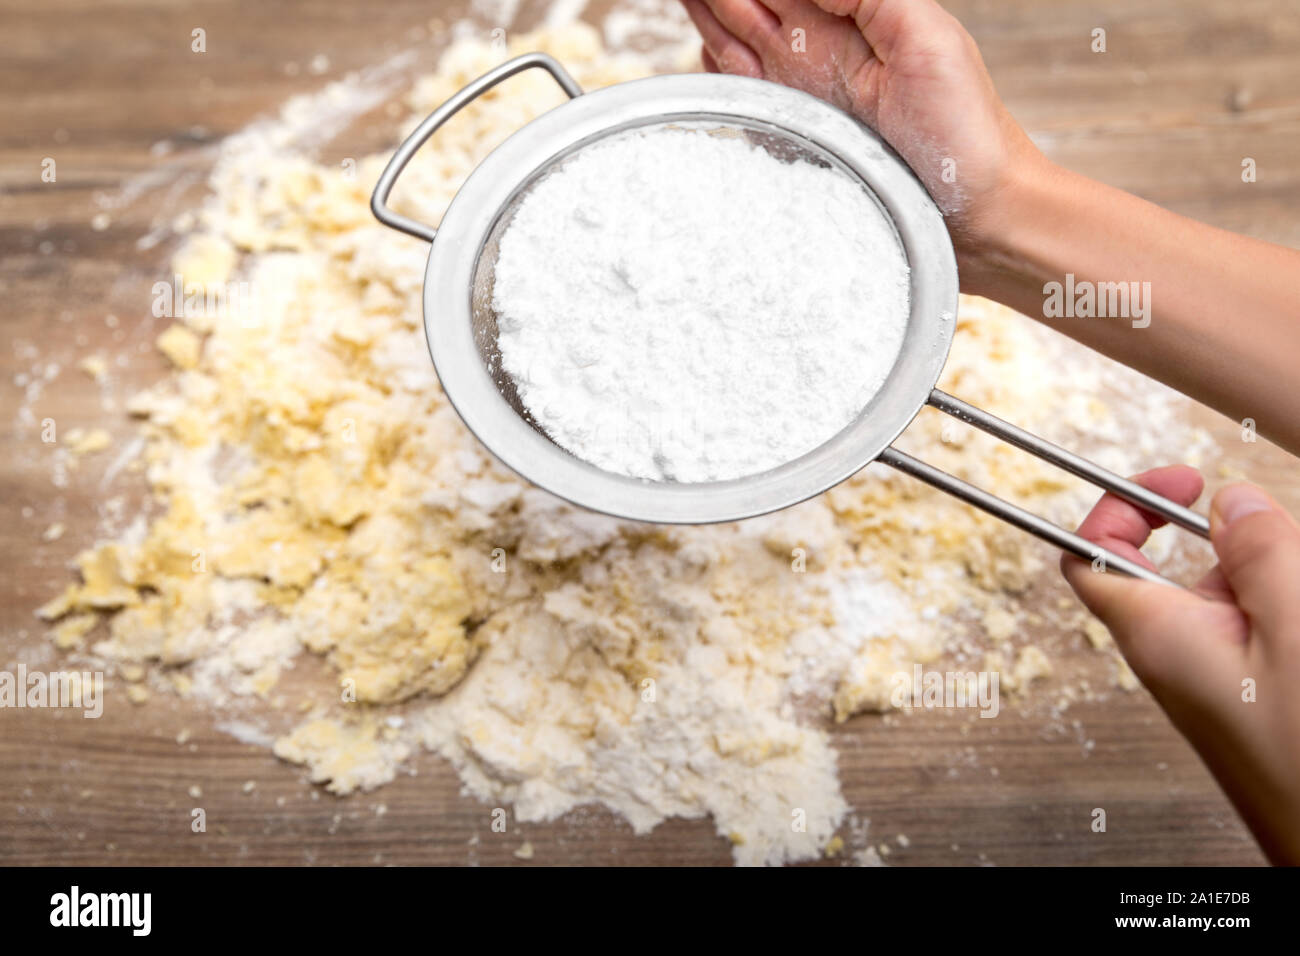 Woman sifting icing sugar on a raw cake or cookie dough, bakery step Stock Photo